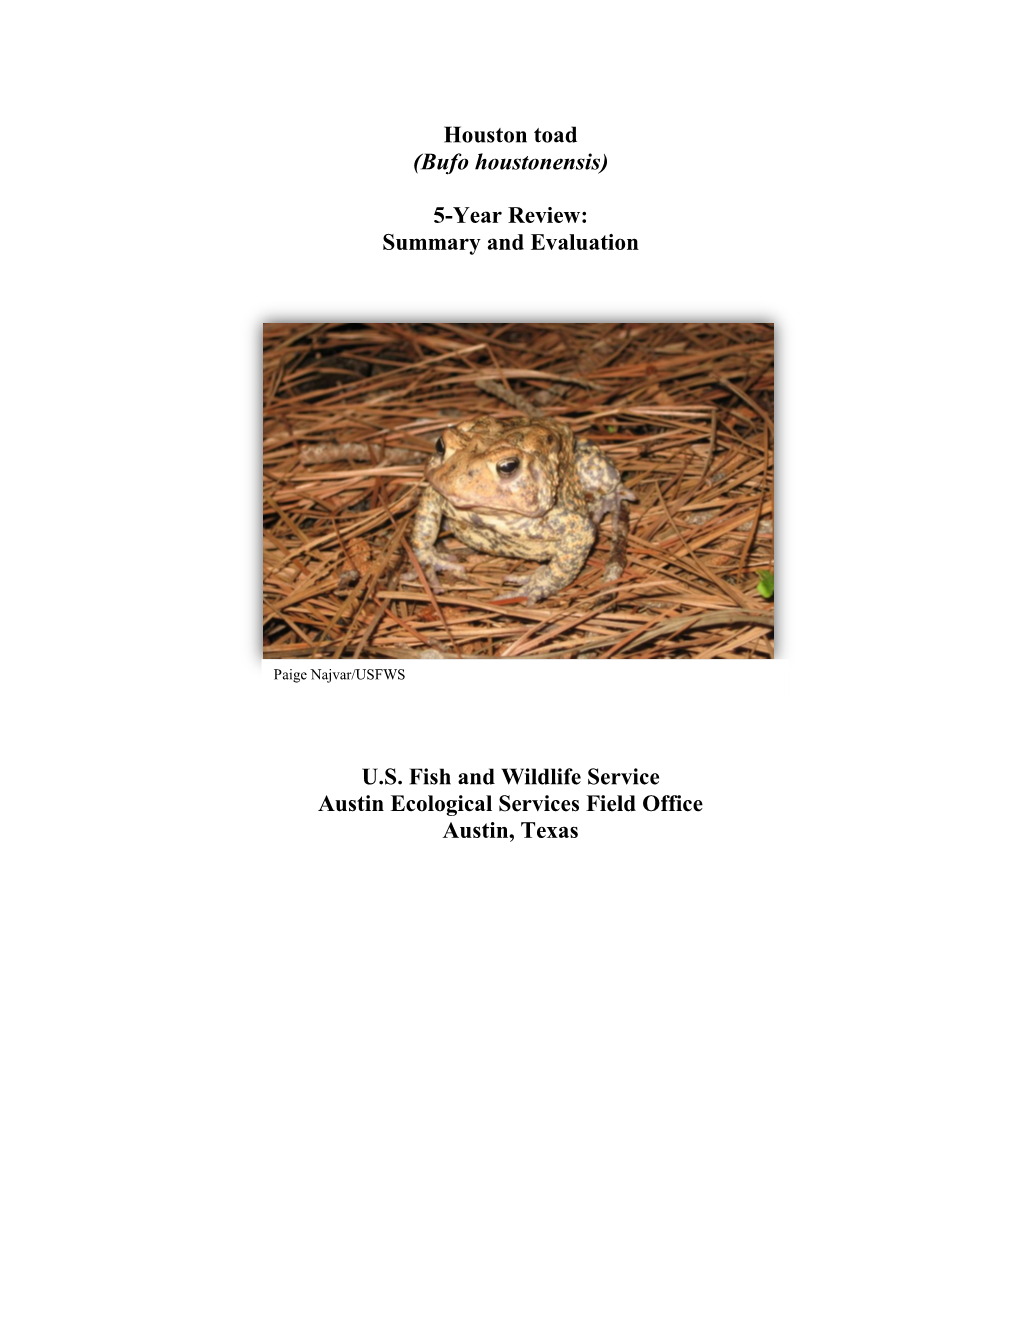 5-YEAR REVIEW Houston Toad/Bufo Houstonensis